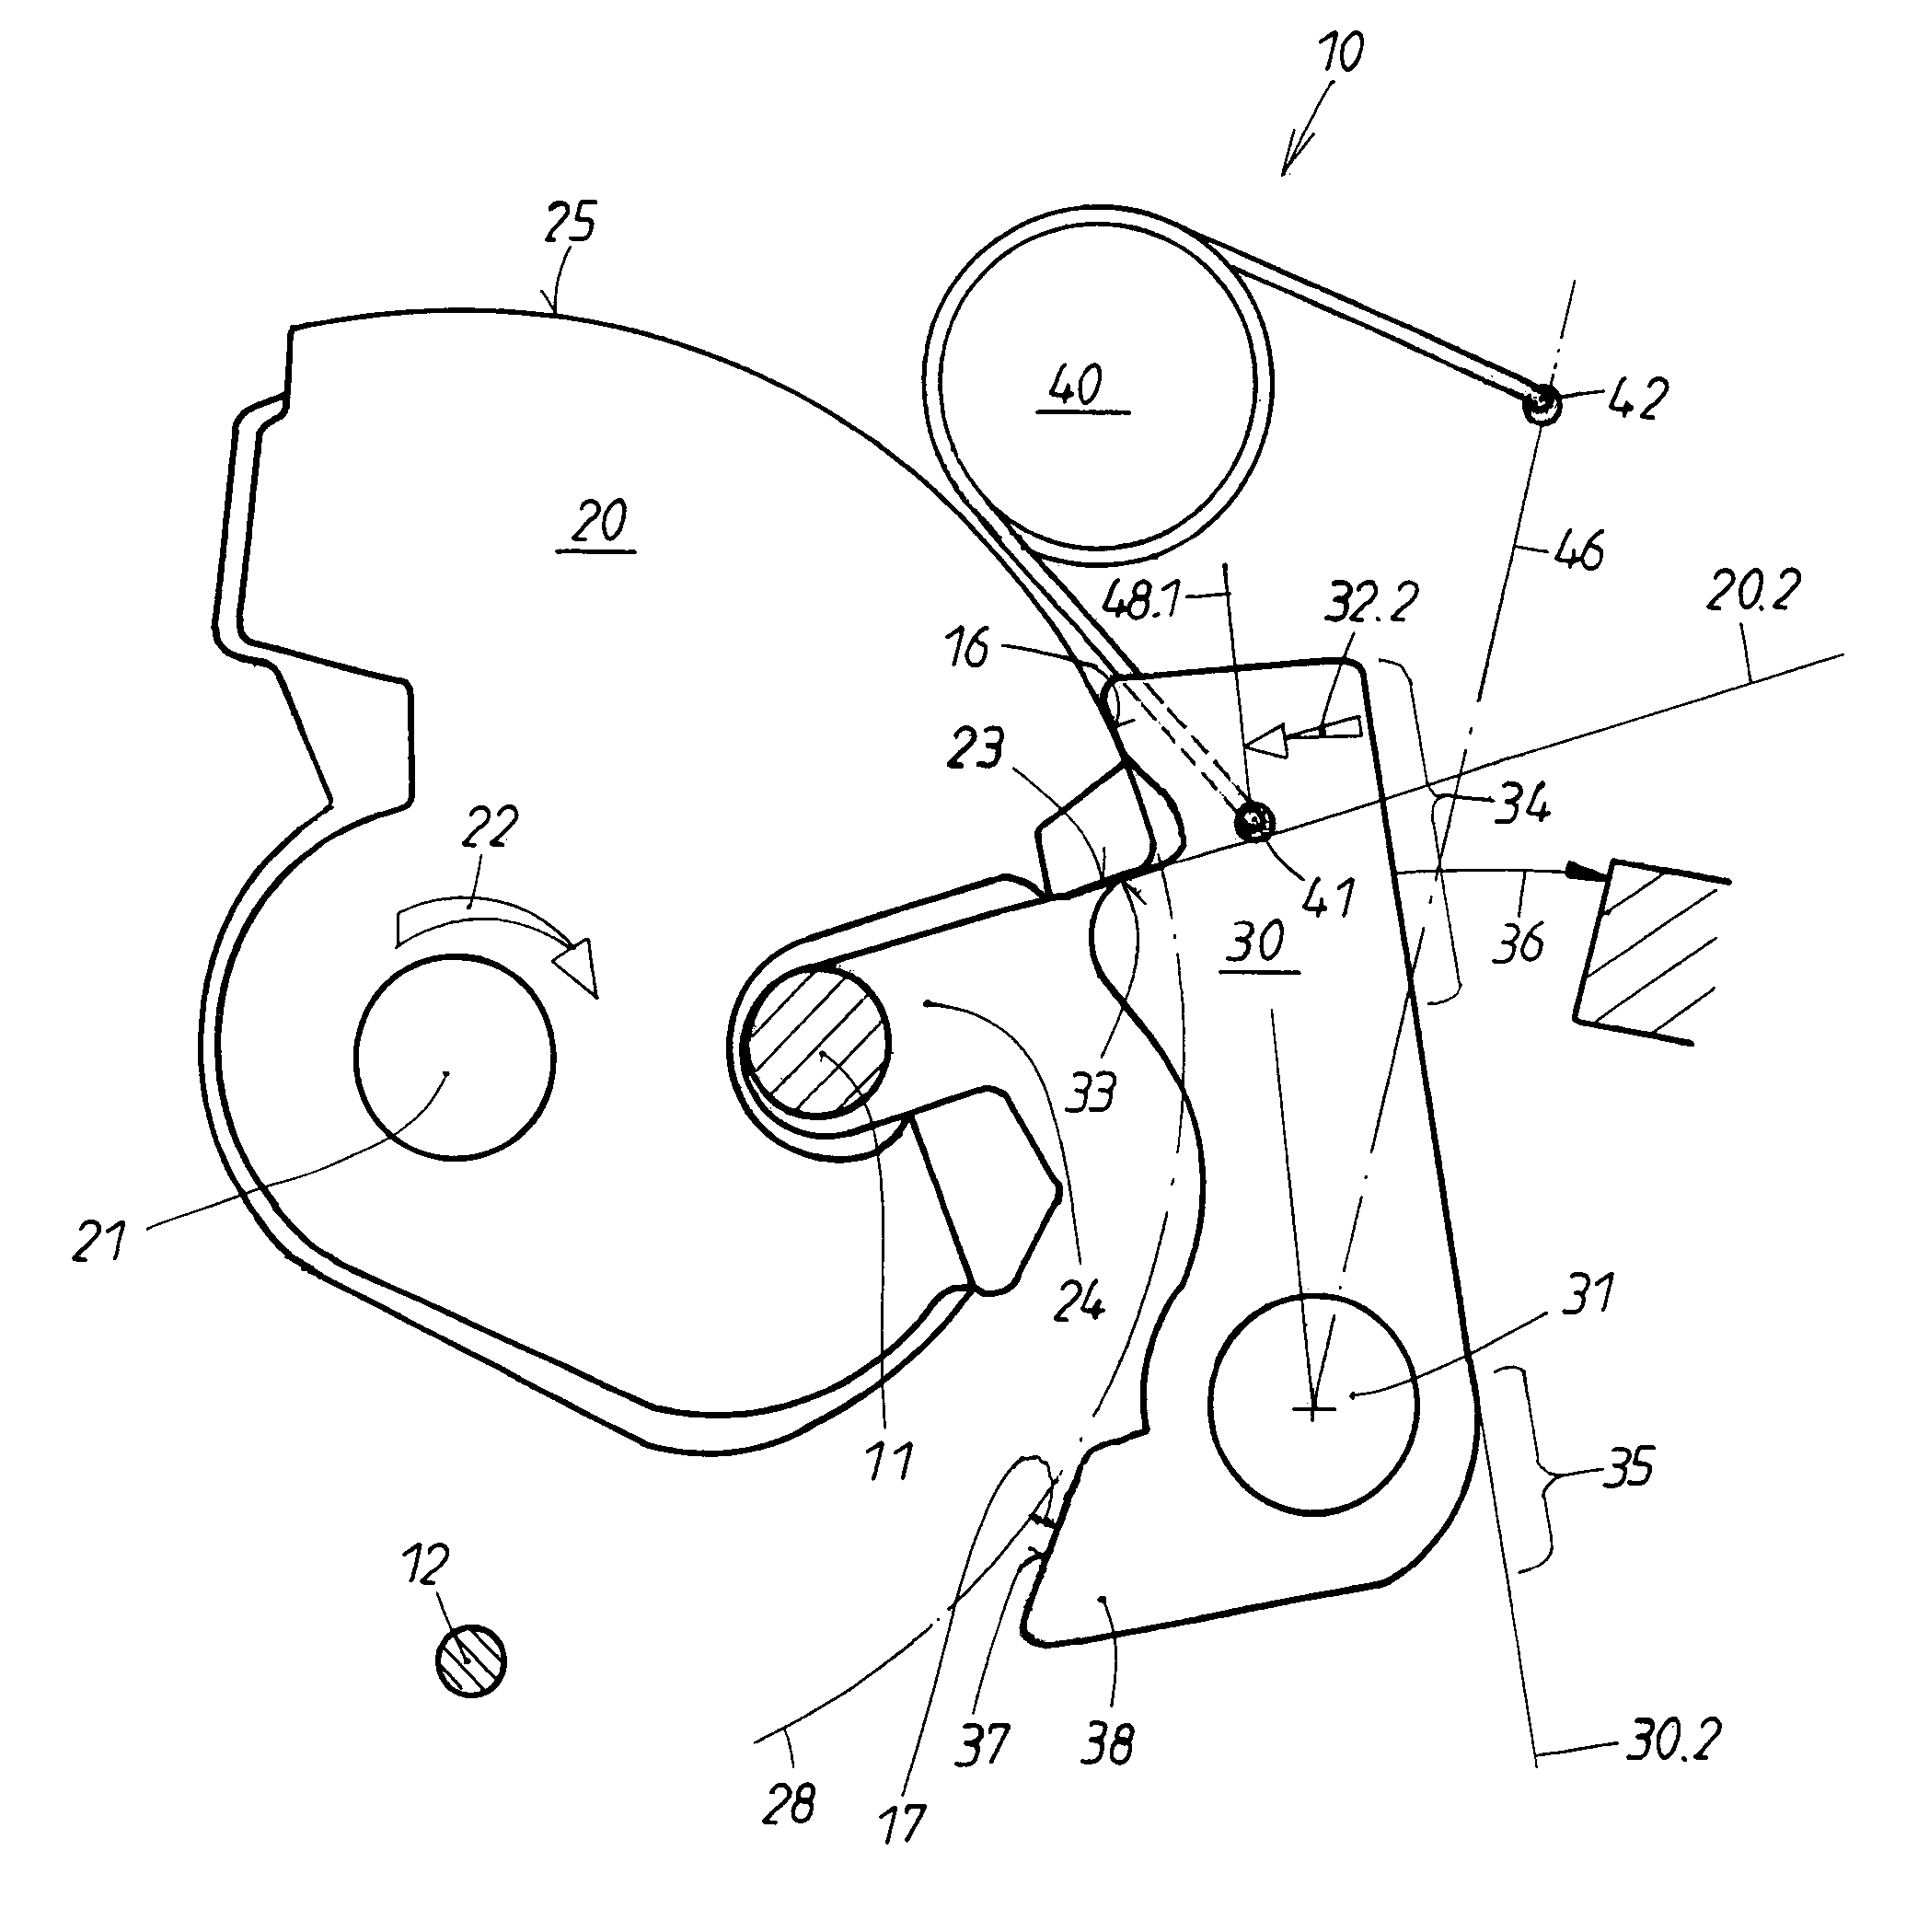 Device for actuating locks on doors or hatches of vehicles